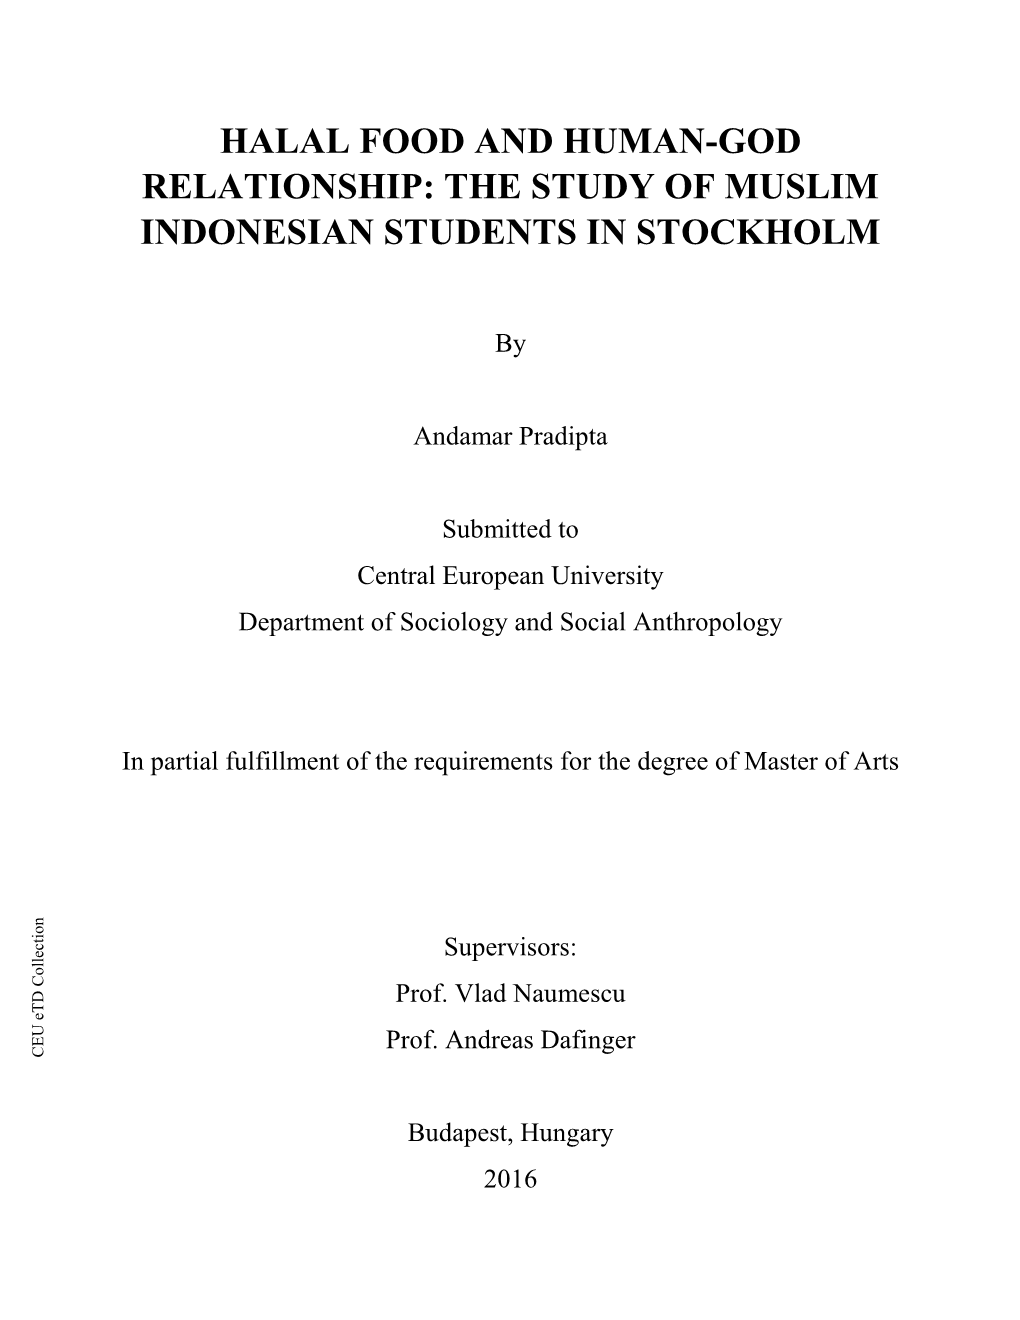 Halal Food and Human-God Relationship: the Study of Muslim Indonesian Students in Stockholm